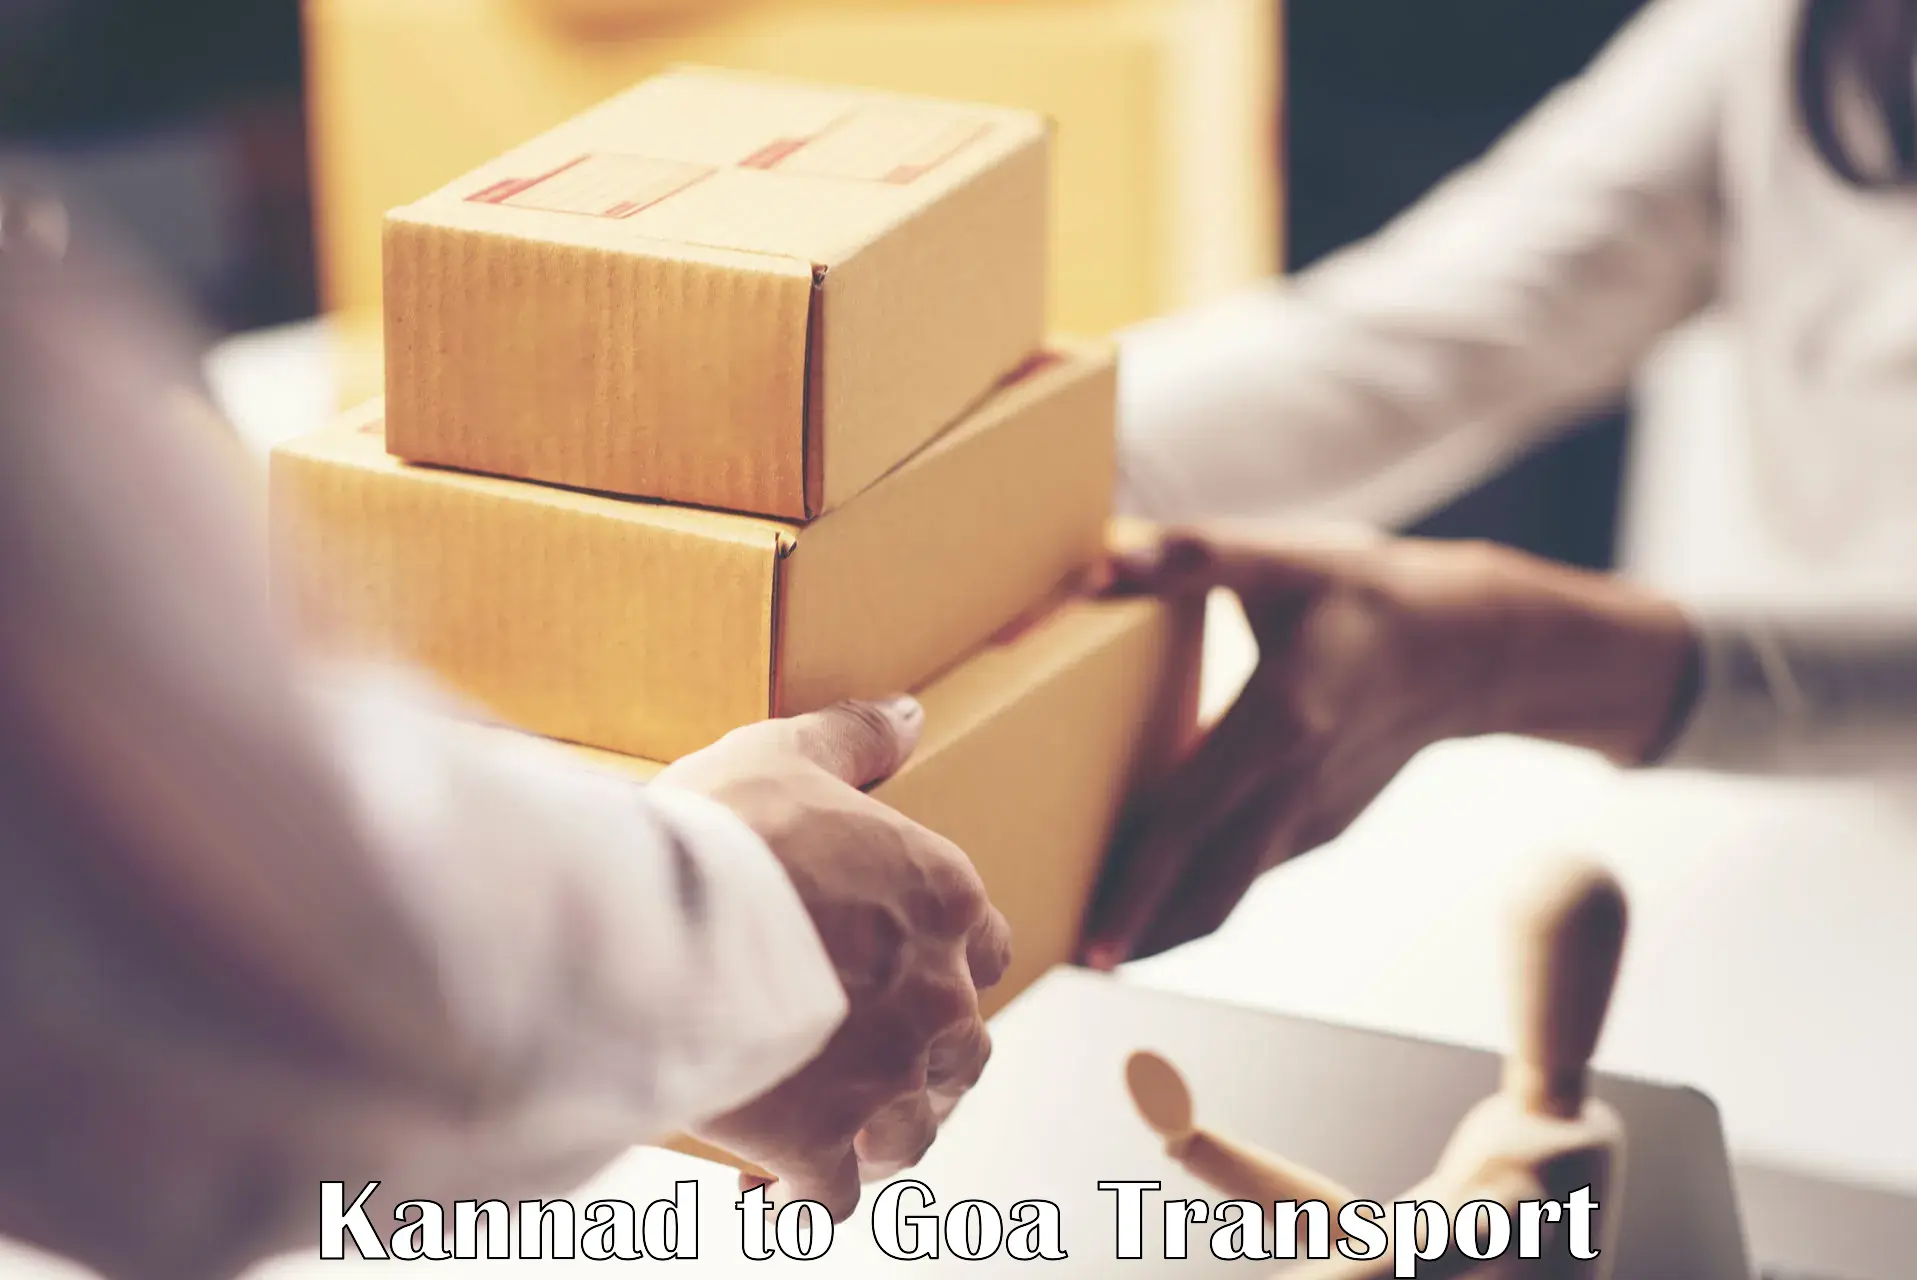 Daily parcel service transport Kannad to Goa